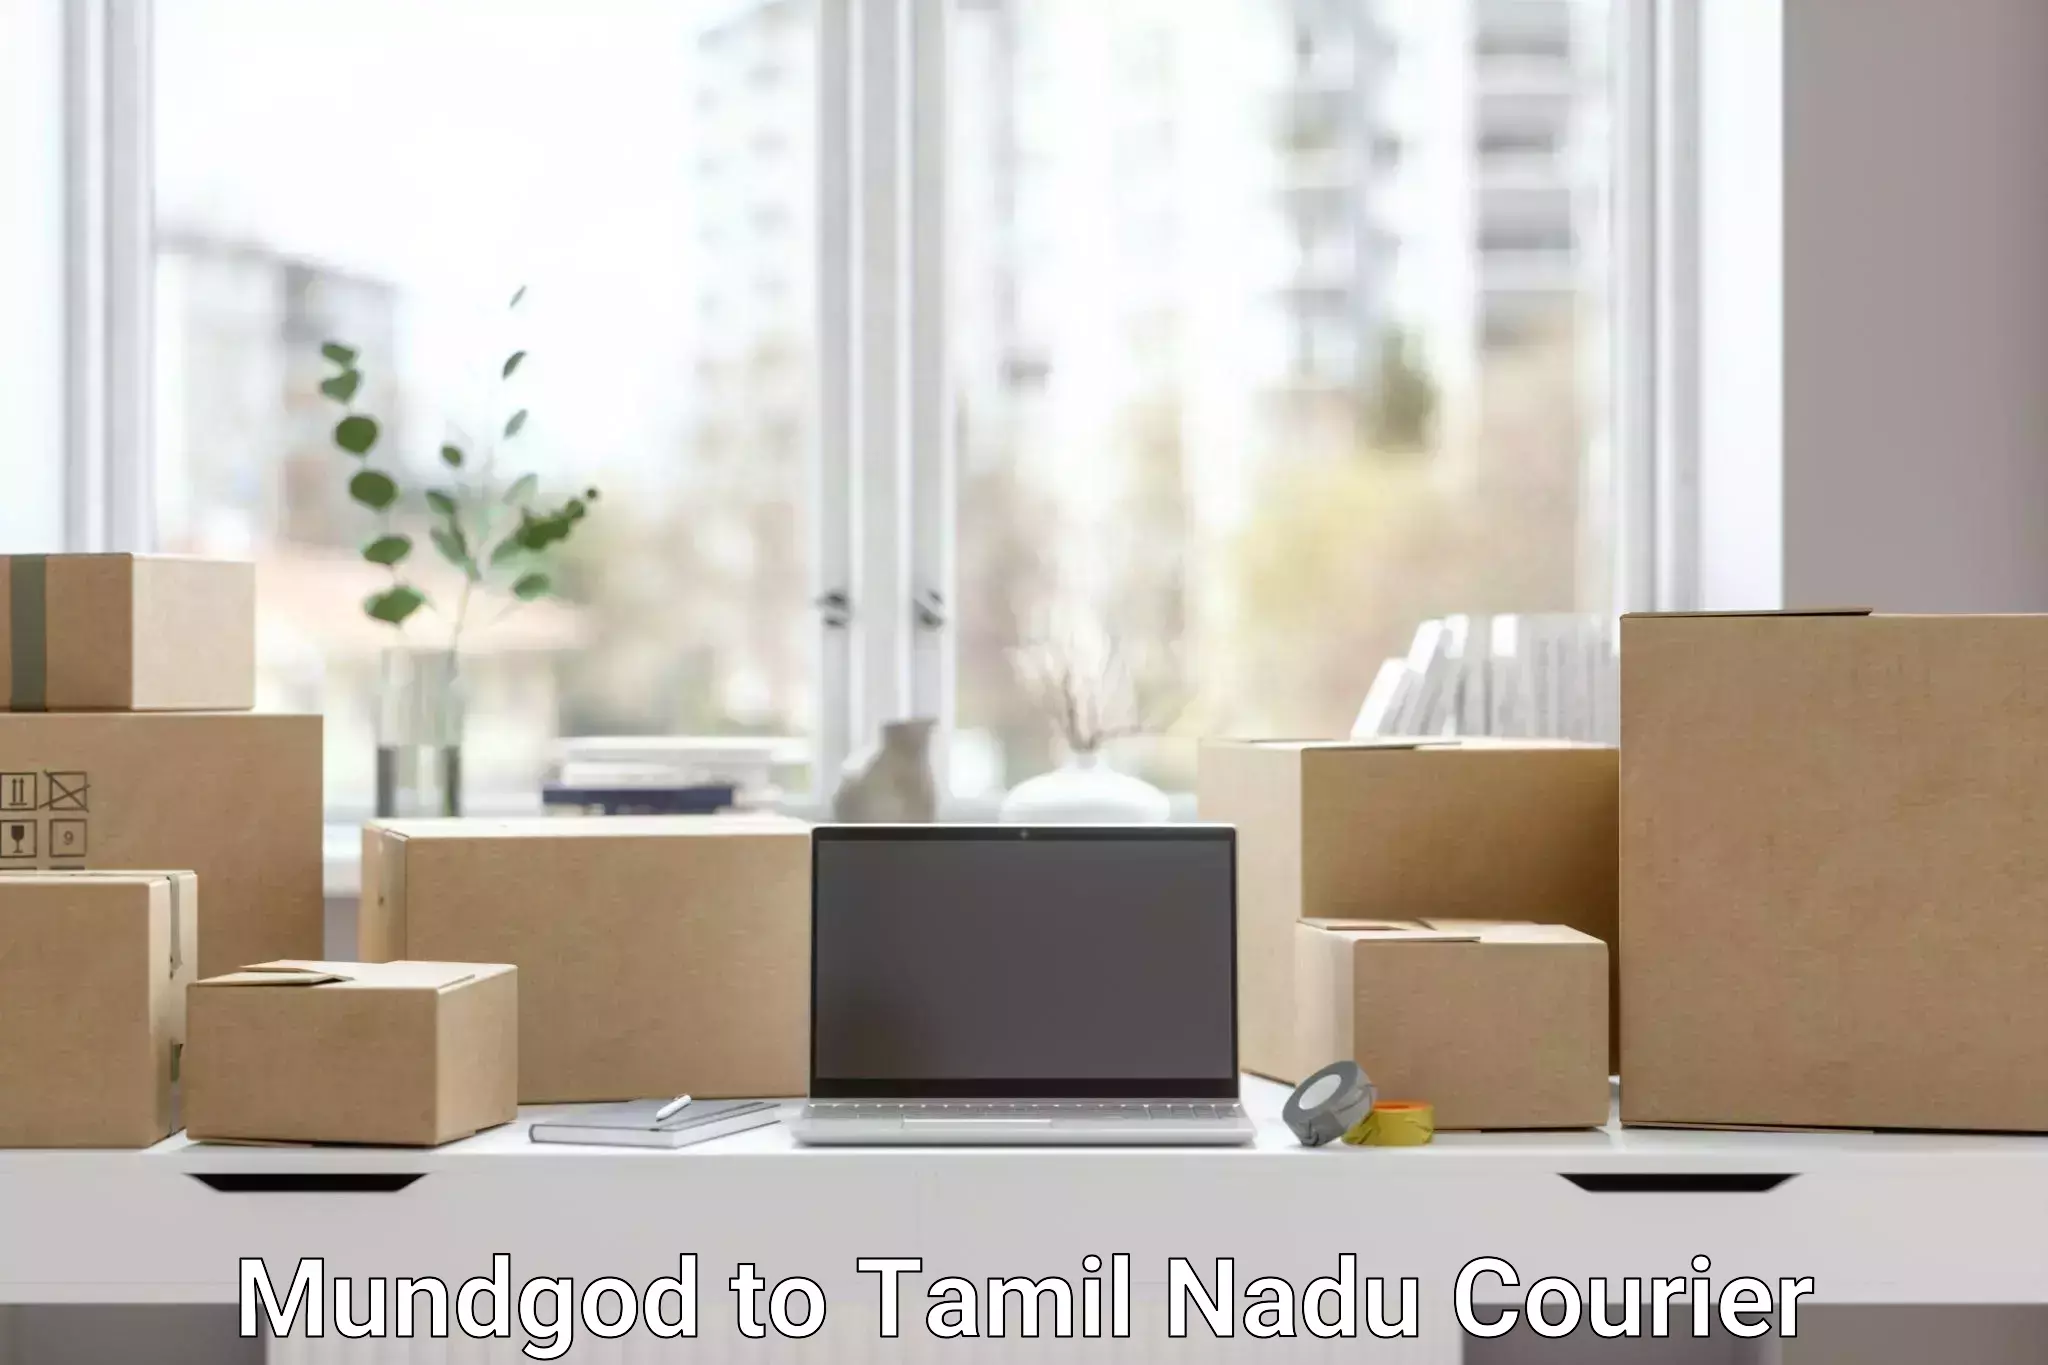 On-call courier service Mundgod to Tamil Nadu